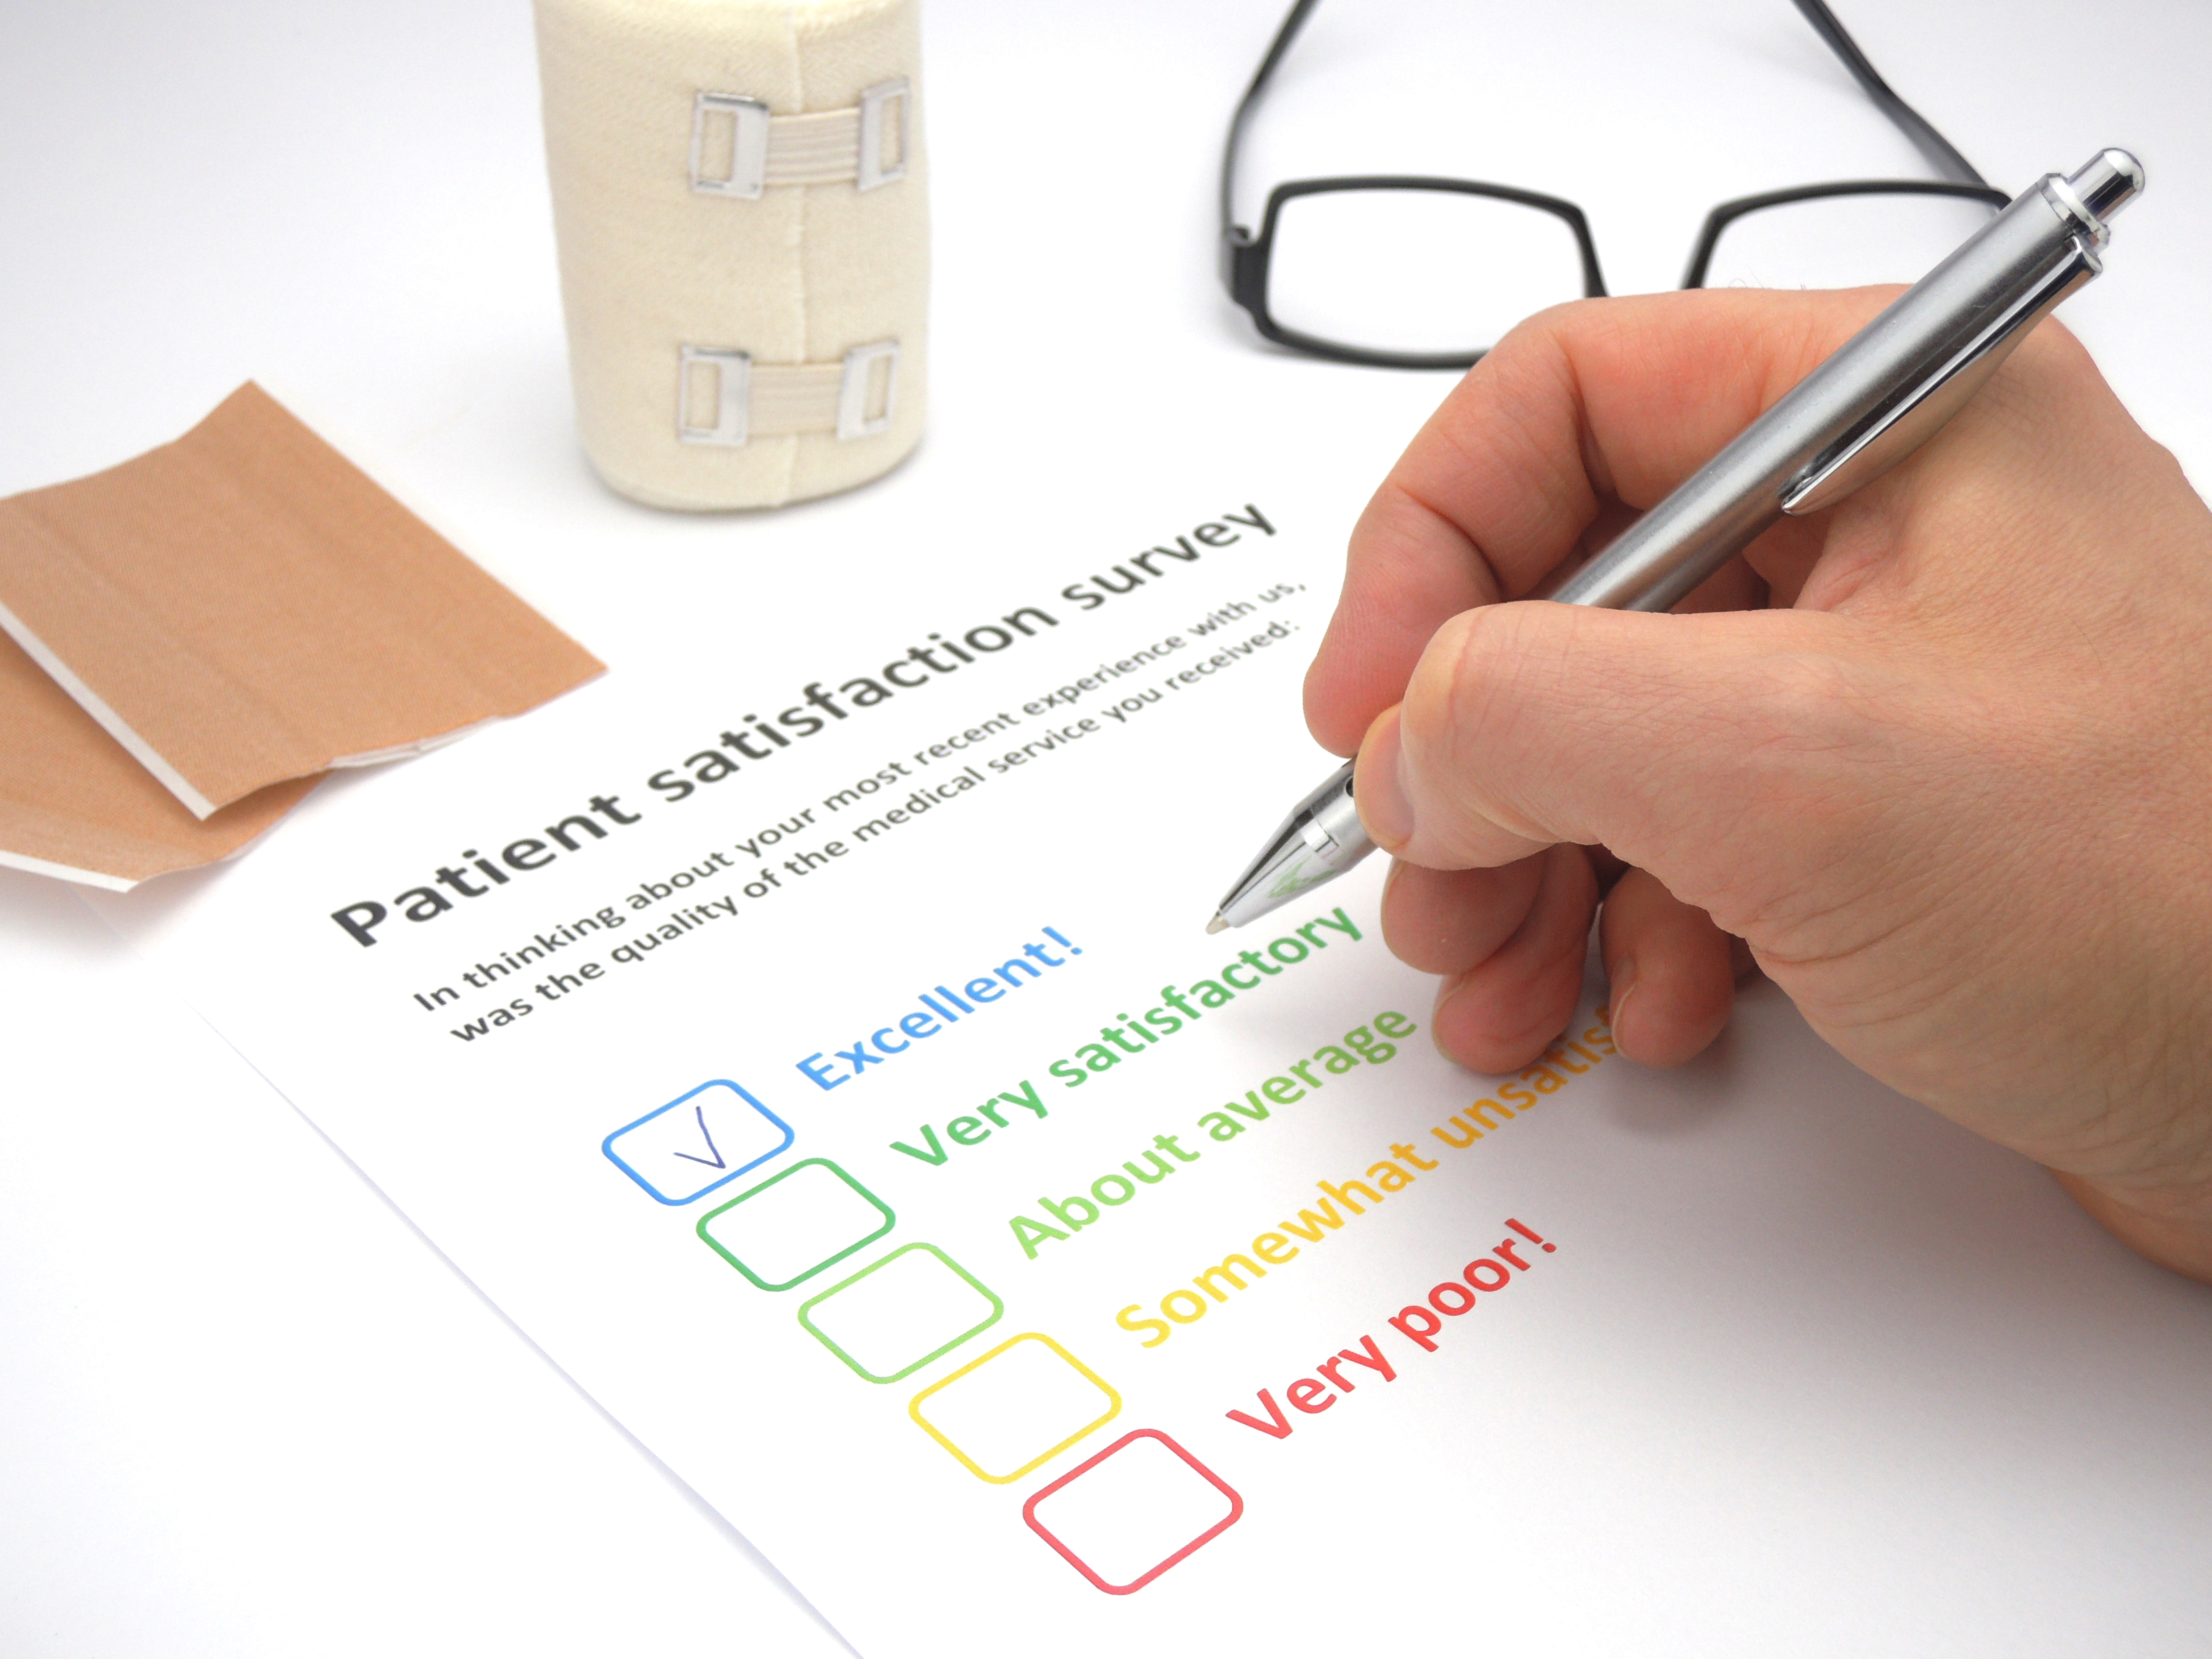 Patient Satisfaction Surveys as a Quality Improvement Tool for Healthcare Practices